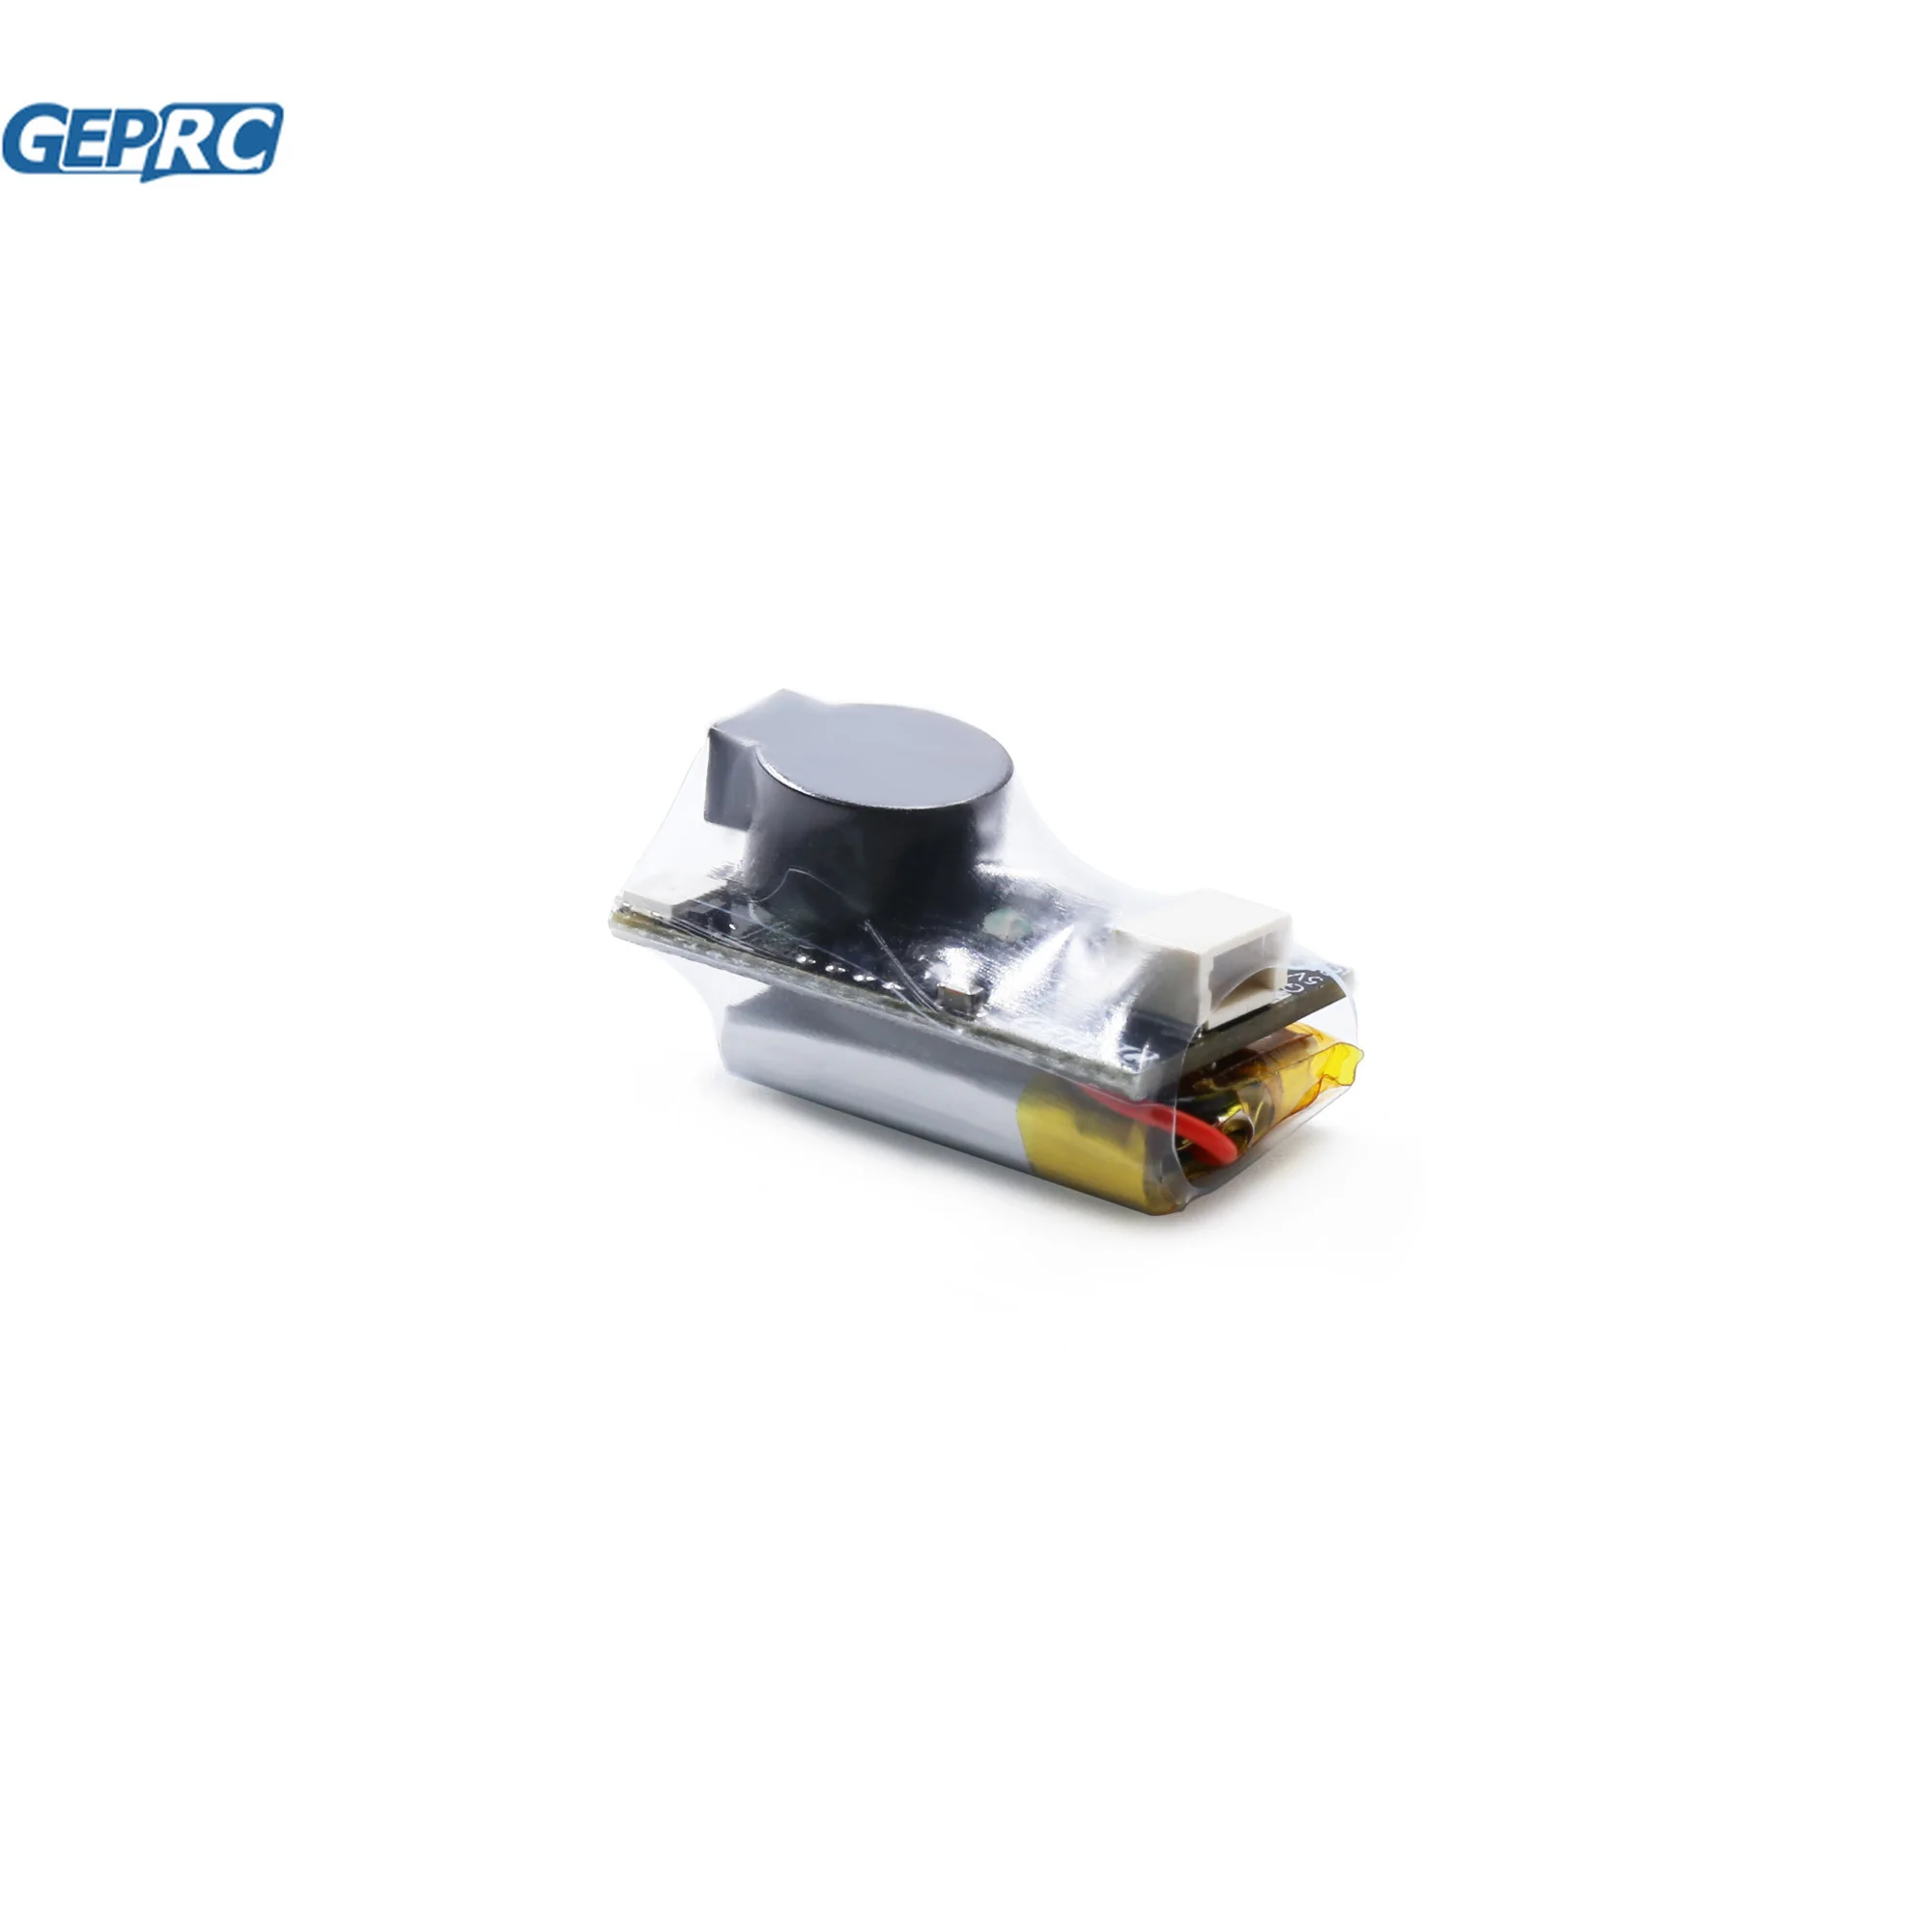 GEPRC-Super-Buzzer-Suitable-For-Drone-Loss-Alarm-For-RC-DIY-FPV-Quadcopter-Racing-Freestyle-Drone.webp